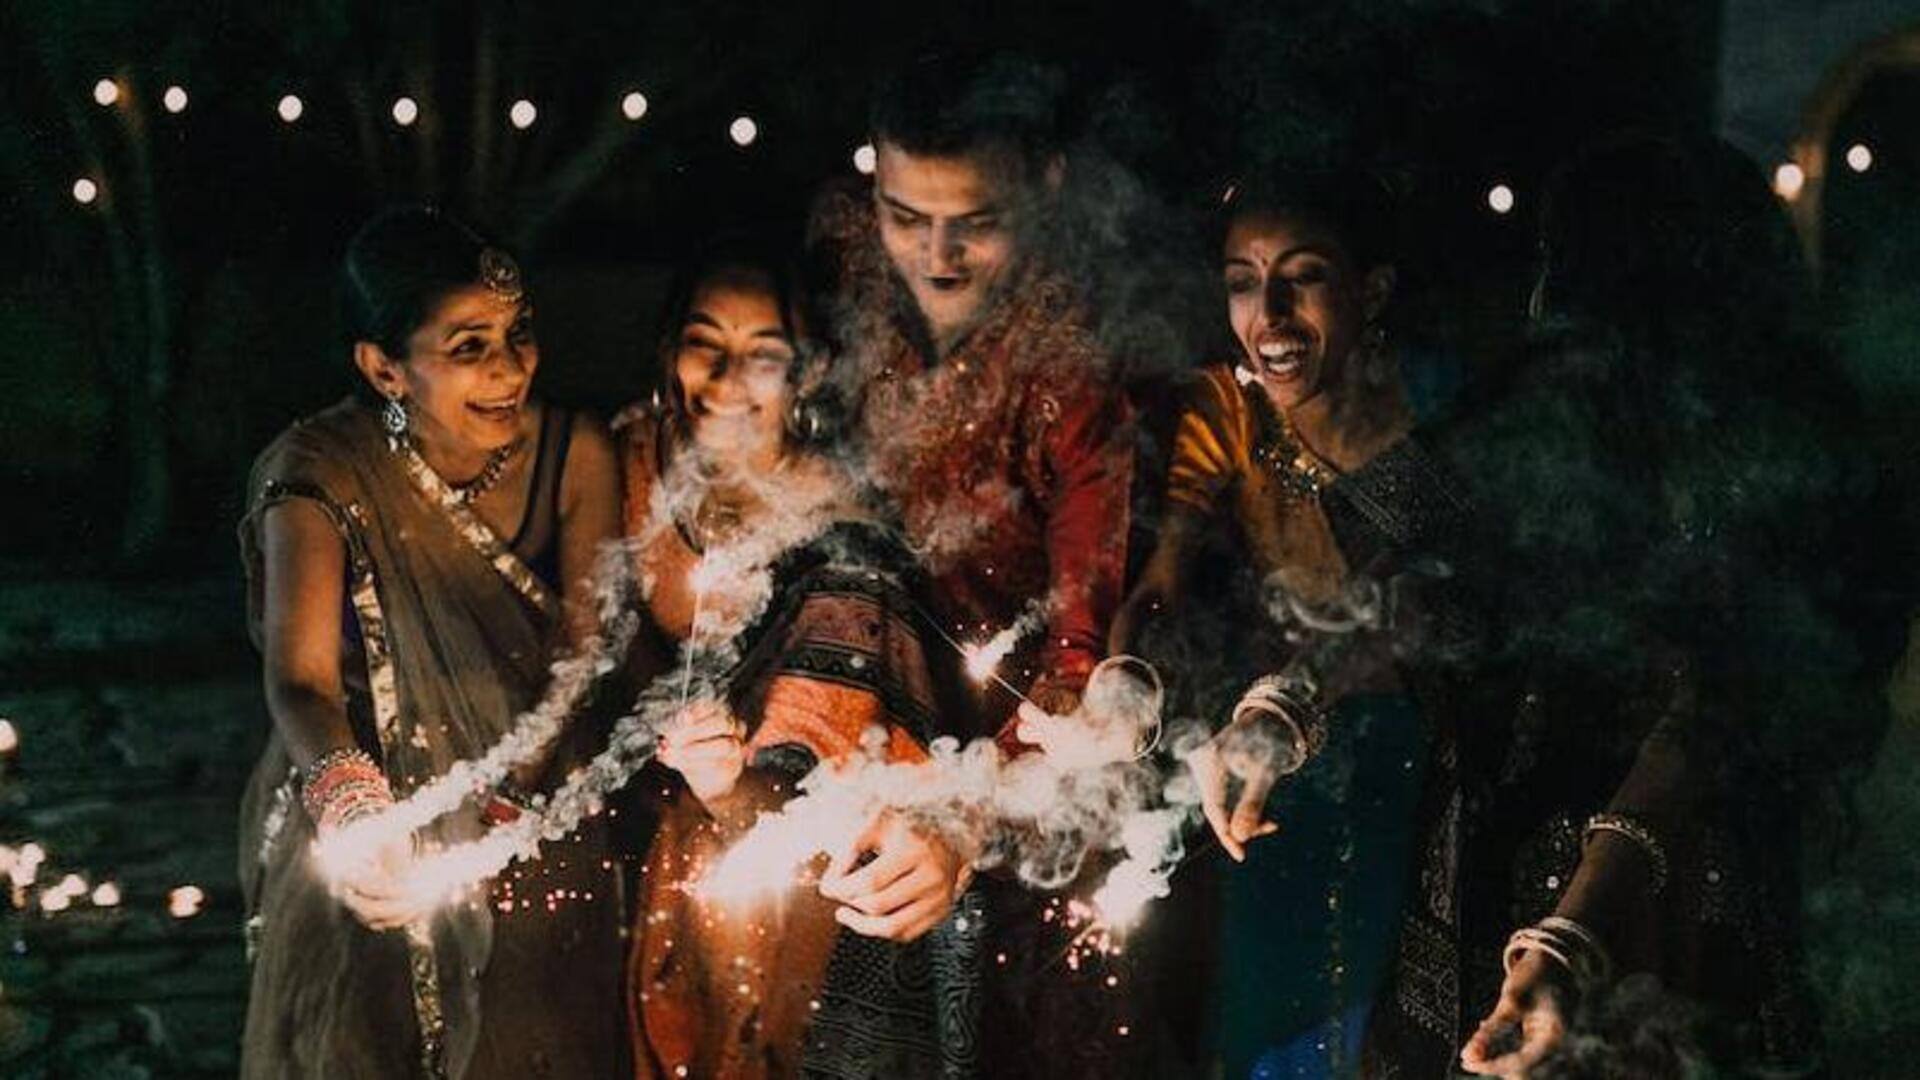 Diwali away from home? Here's what will cheer you up